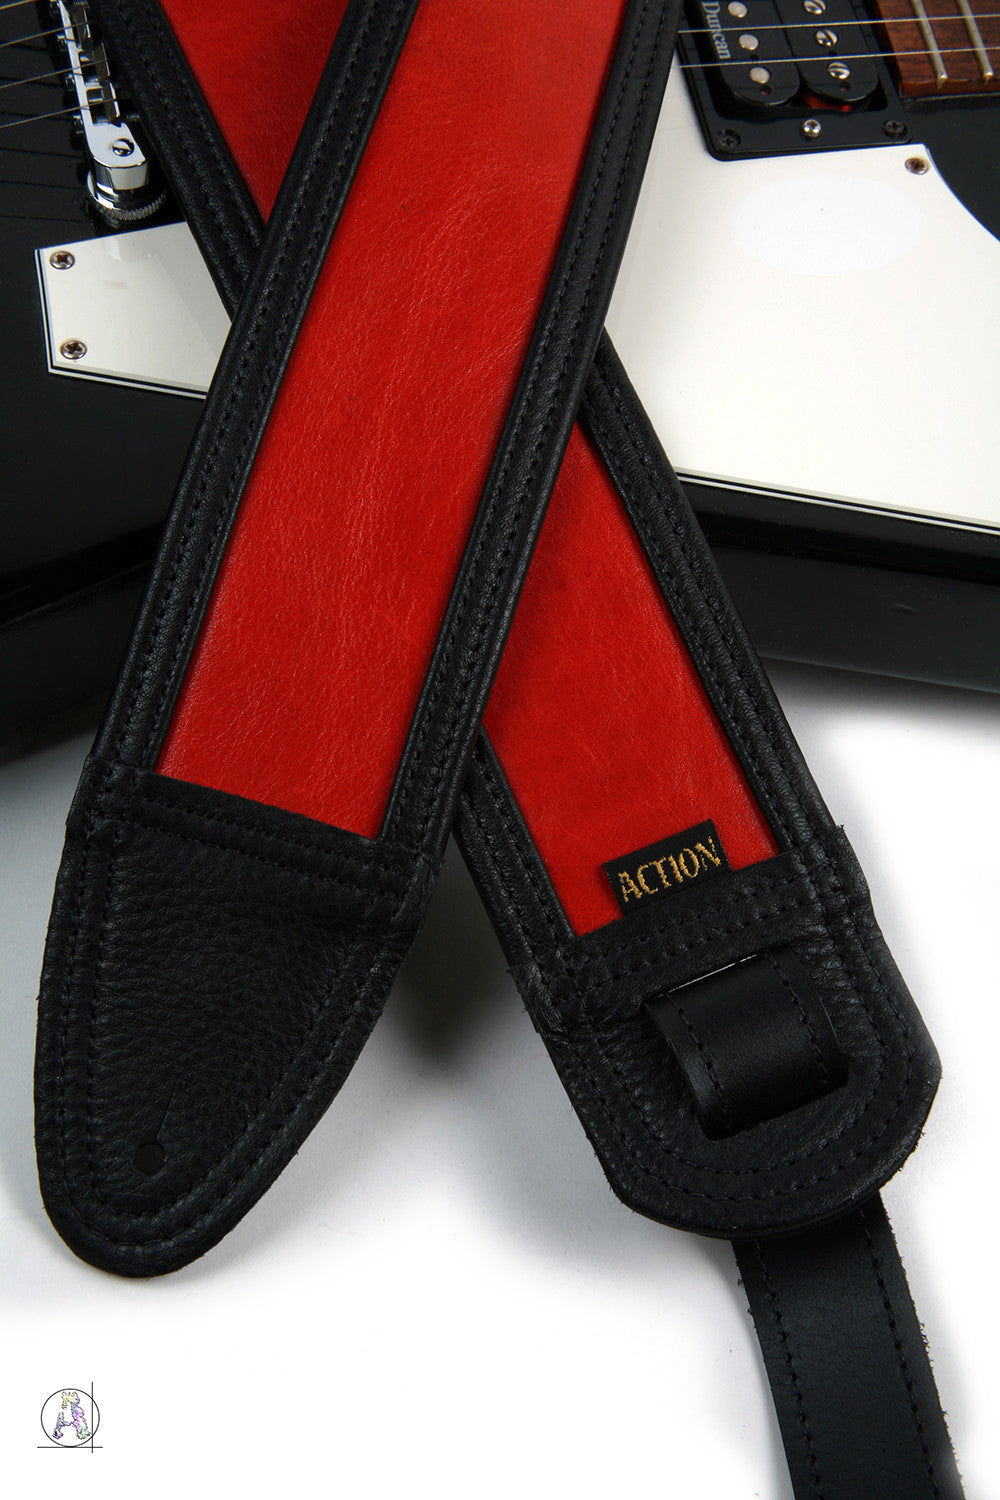 Limited Edition Echo Flame Red and Black Custom Guitar Strap